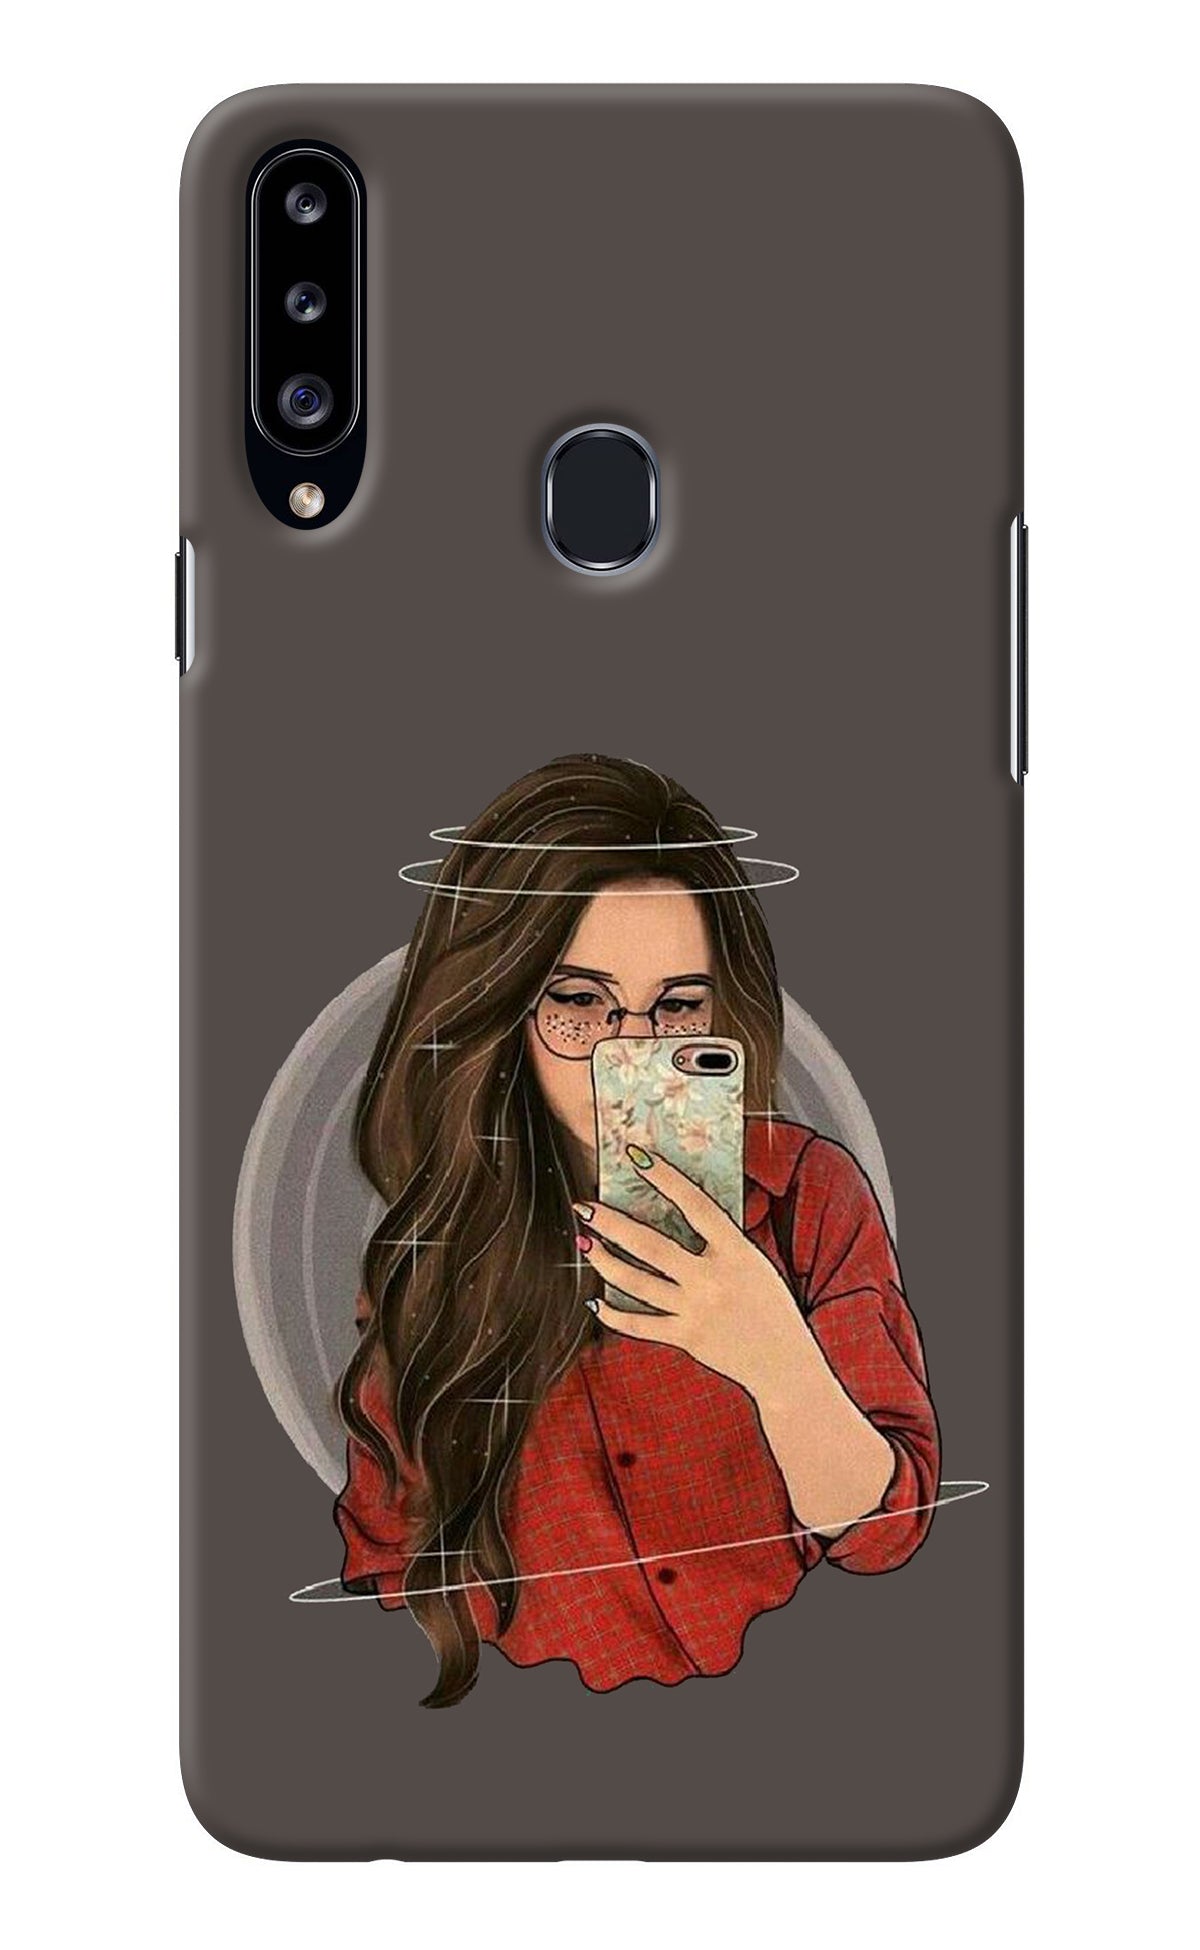 Selfie Queen Samsung A20s Back Cover